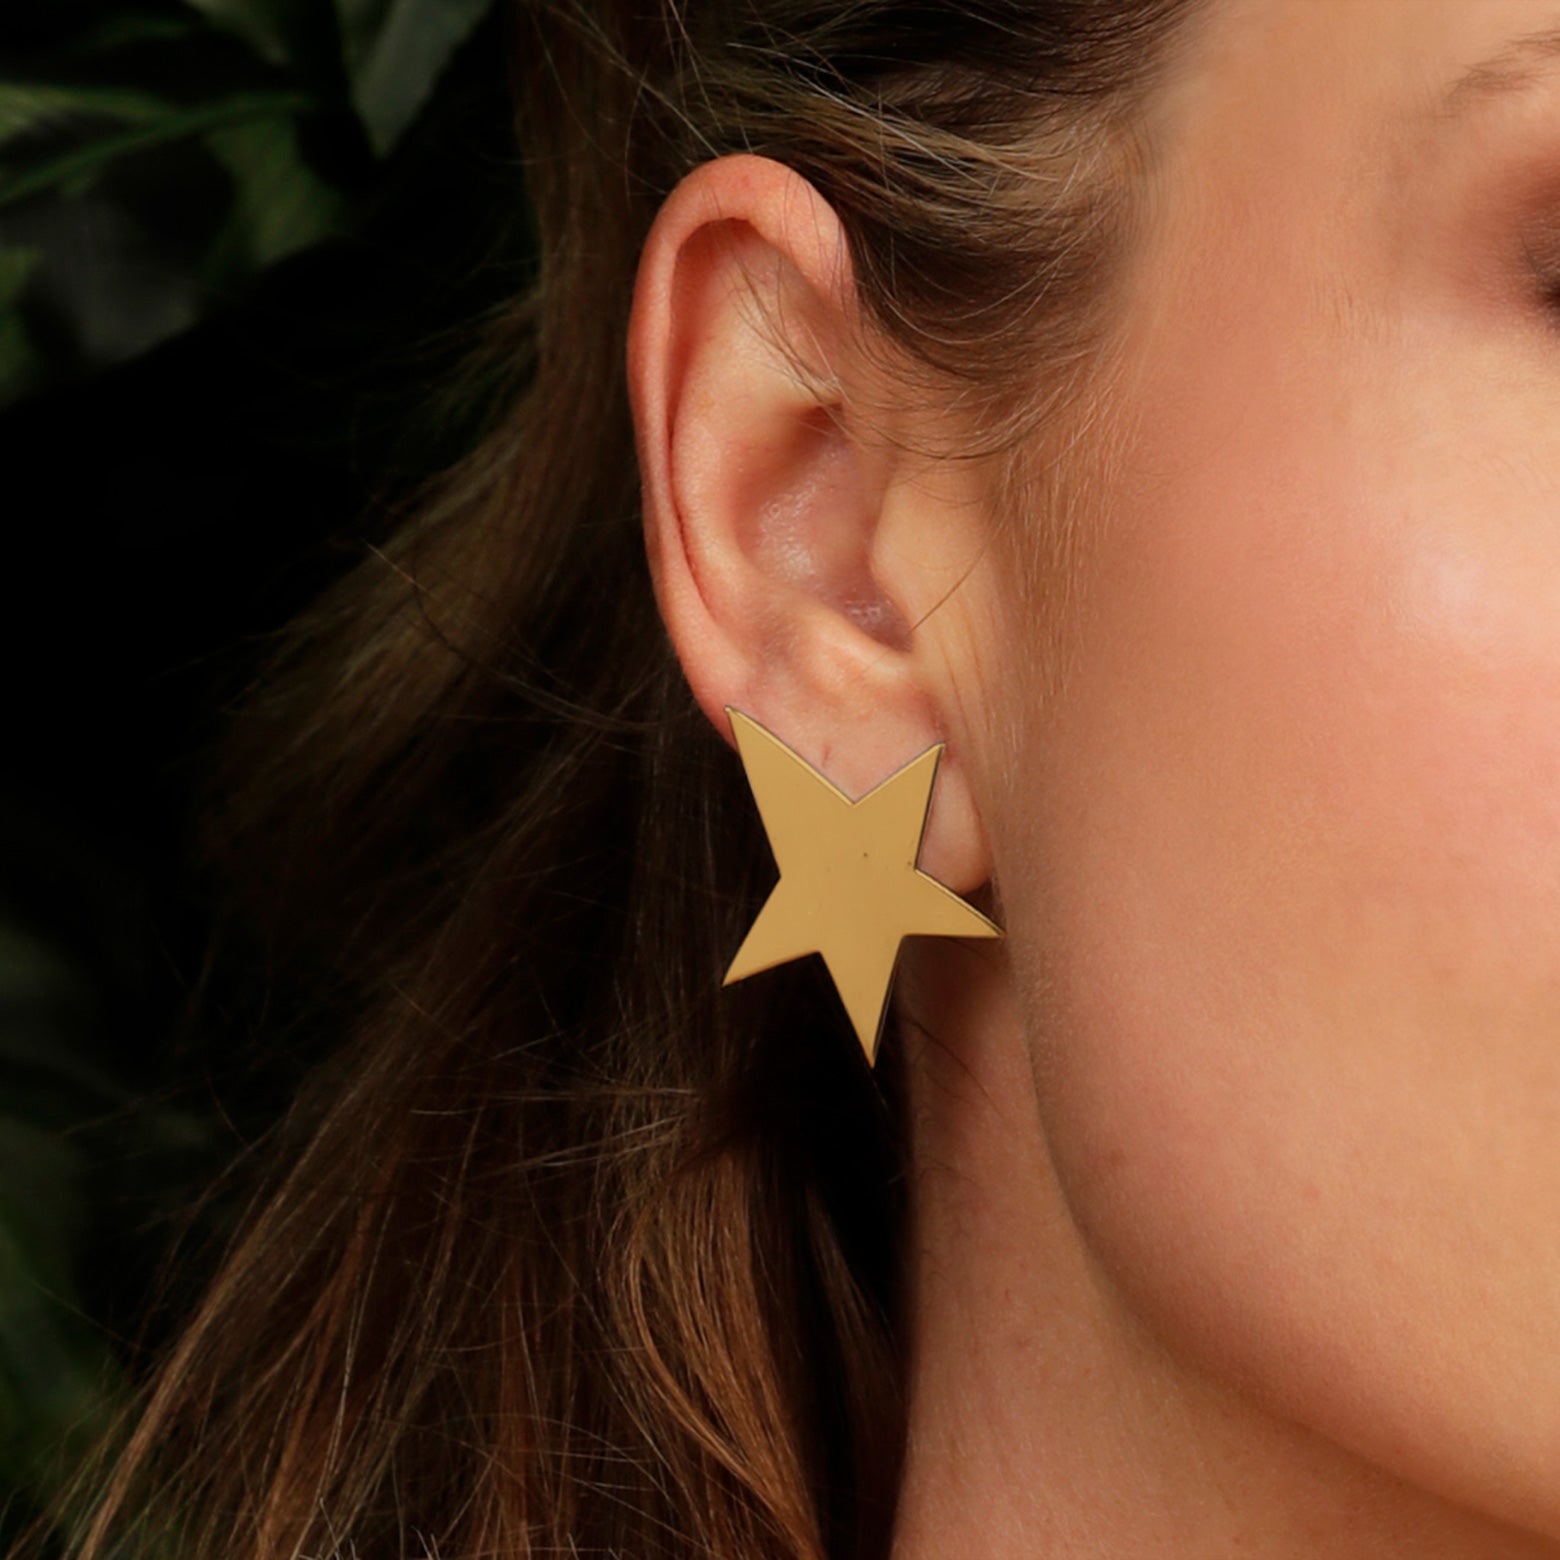 Close up of an ear wearing the Kelly Woodcroft gold starfish earrings.